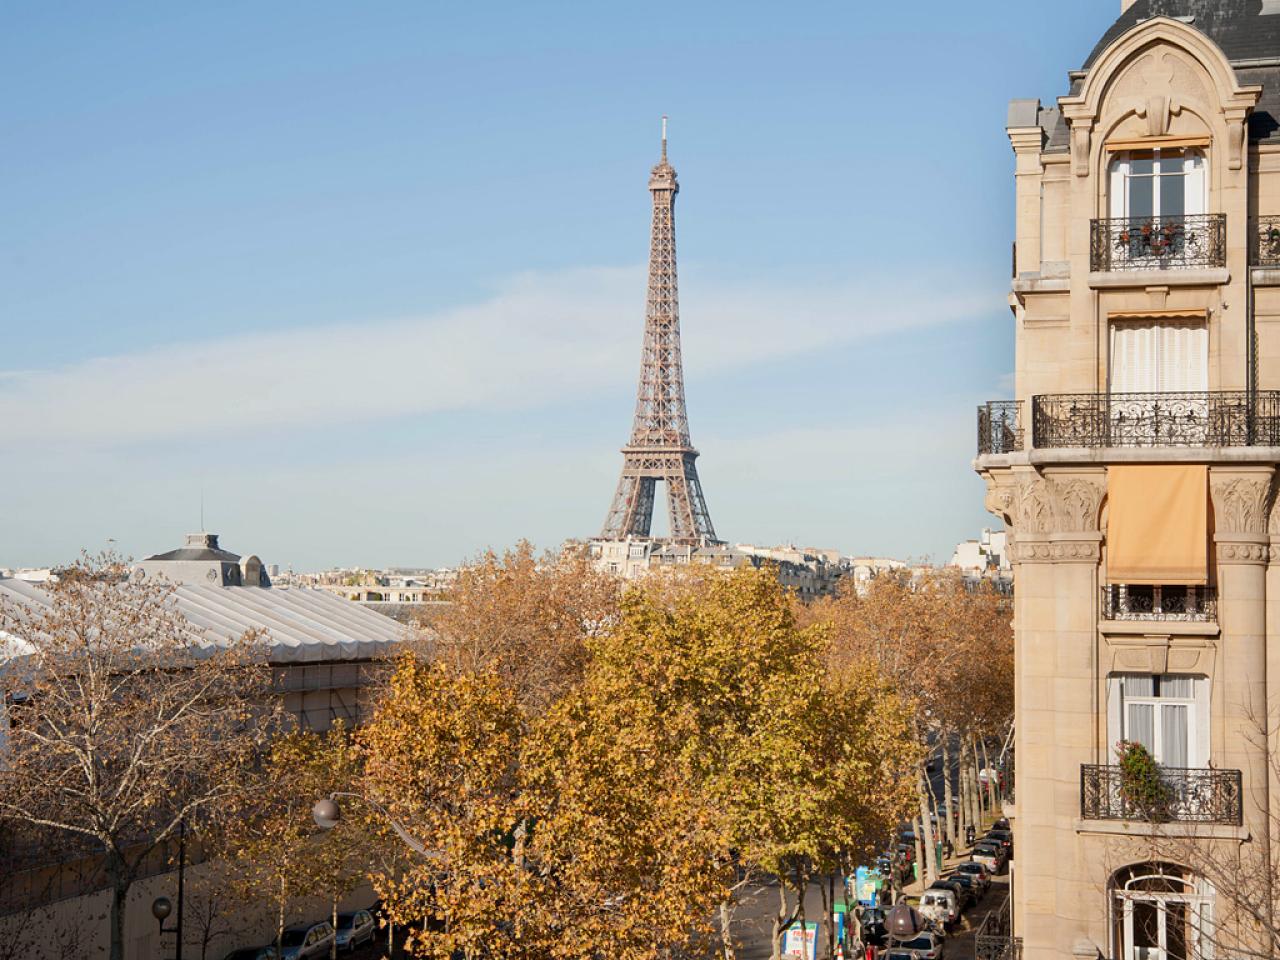 Top Paris Hotels With Eiffel Tower Views: 10 Top Choices!